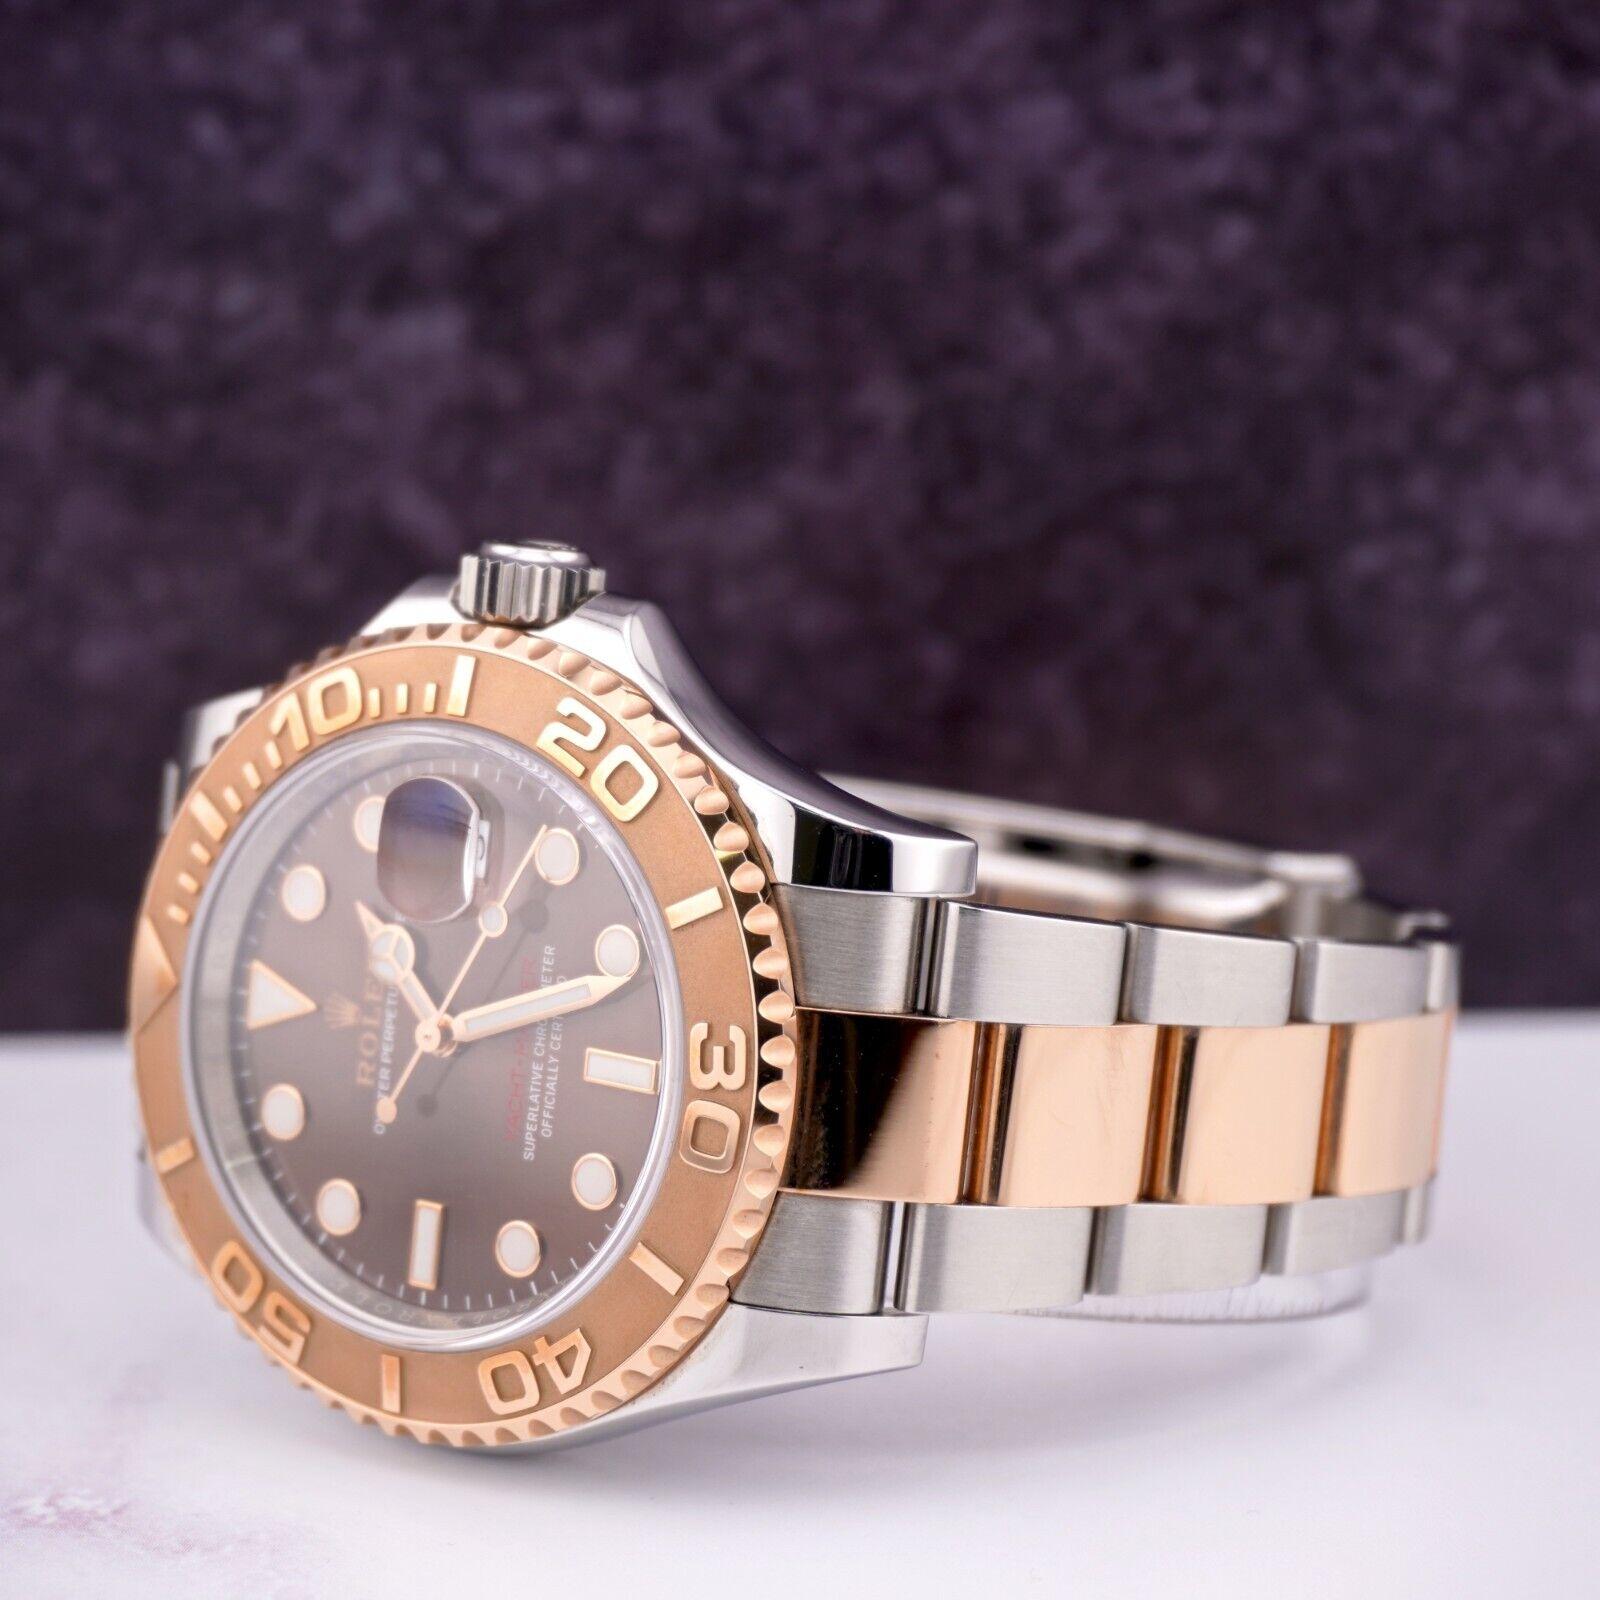 Rolex Yacht-Master 40mm Oyster 18k Rose Gold & Steel Watch Chocolate Dial 116621 For Sale 4